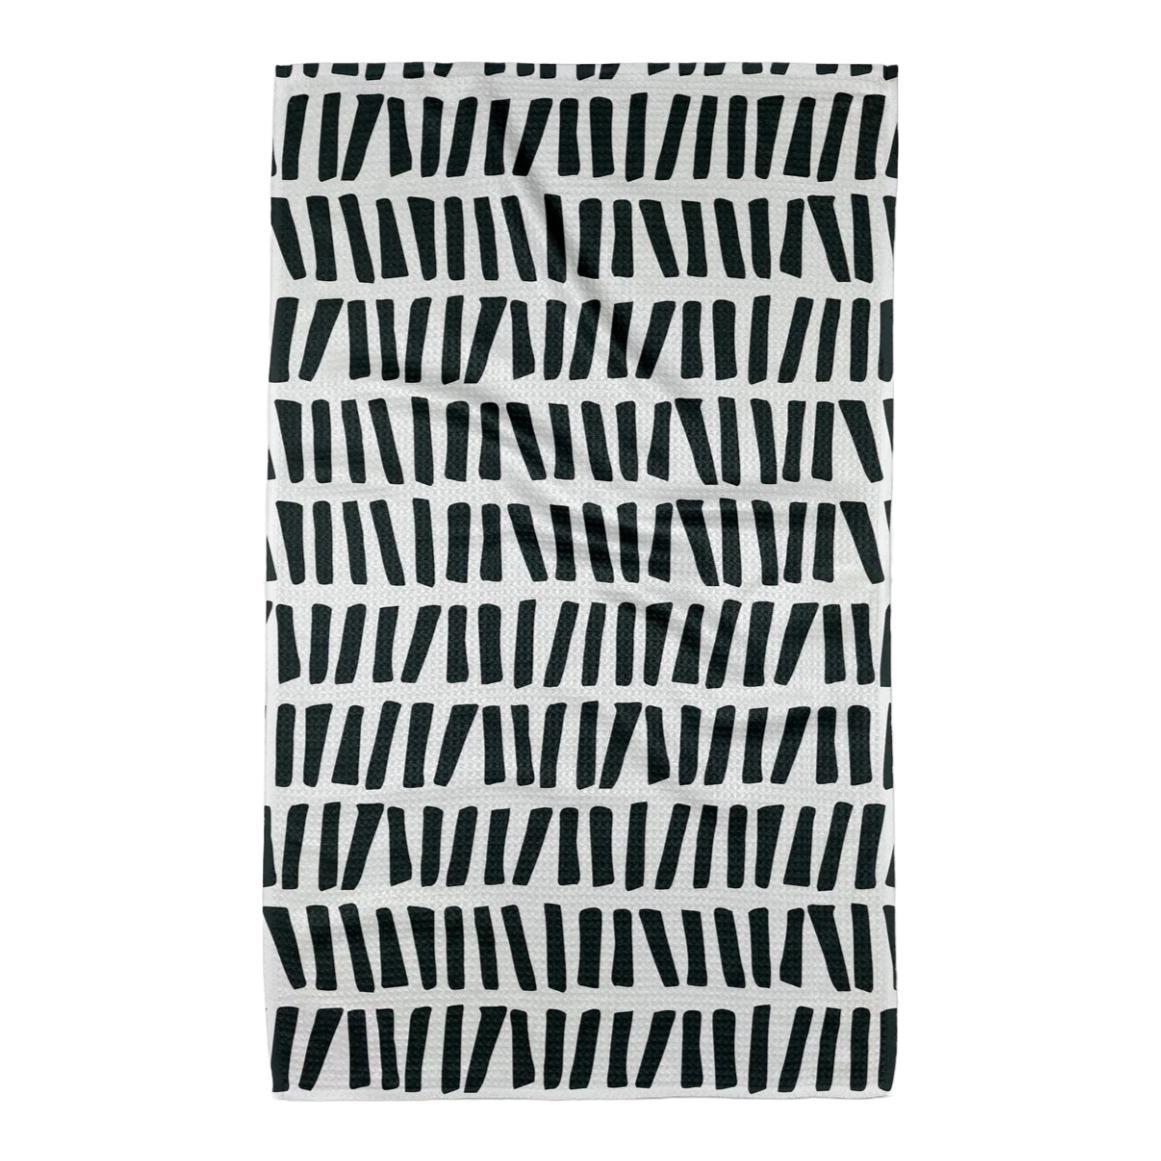 Geometry House - 'All Lined Up' Kitchen Tea Towel (18"x30")